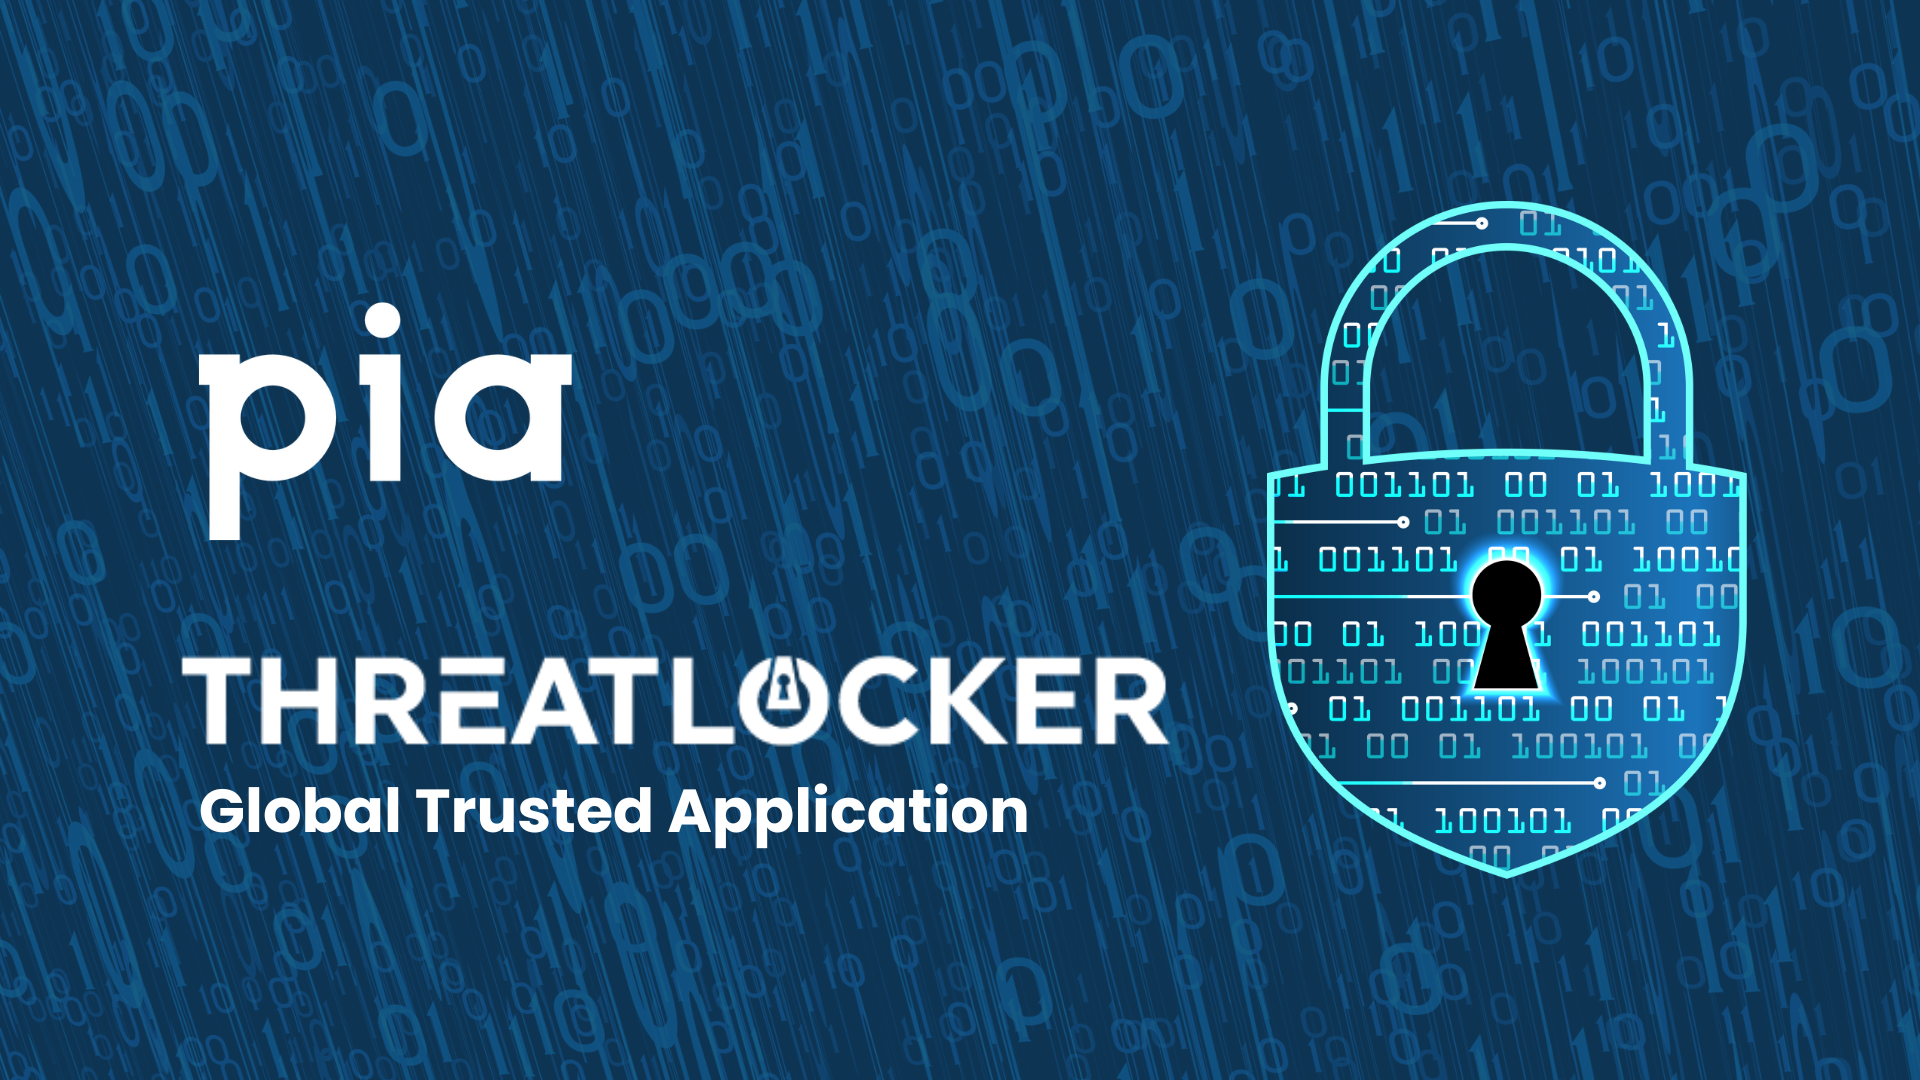 Pia aiDesk Achieves Global Trusted Application Status with ThreatLocker 